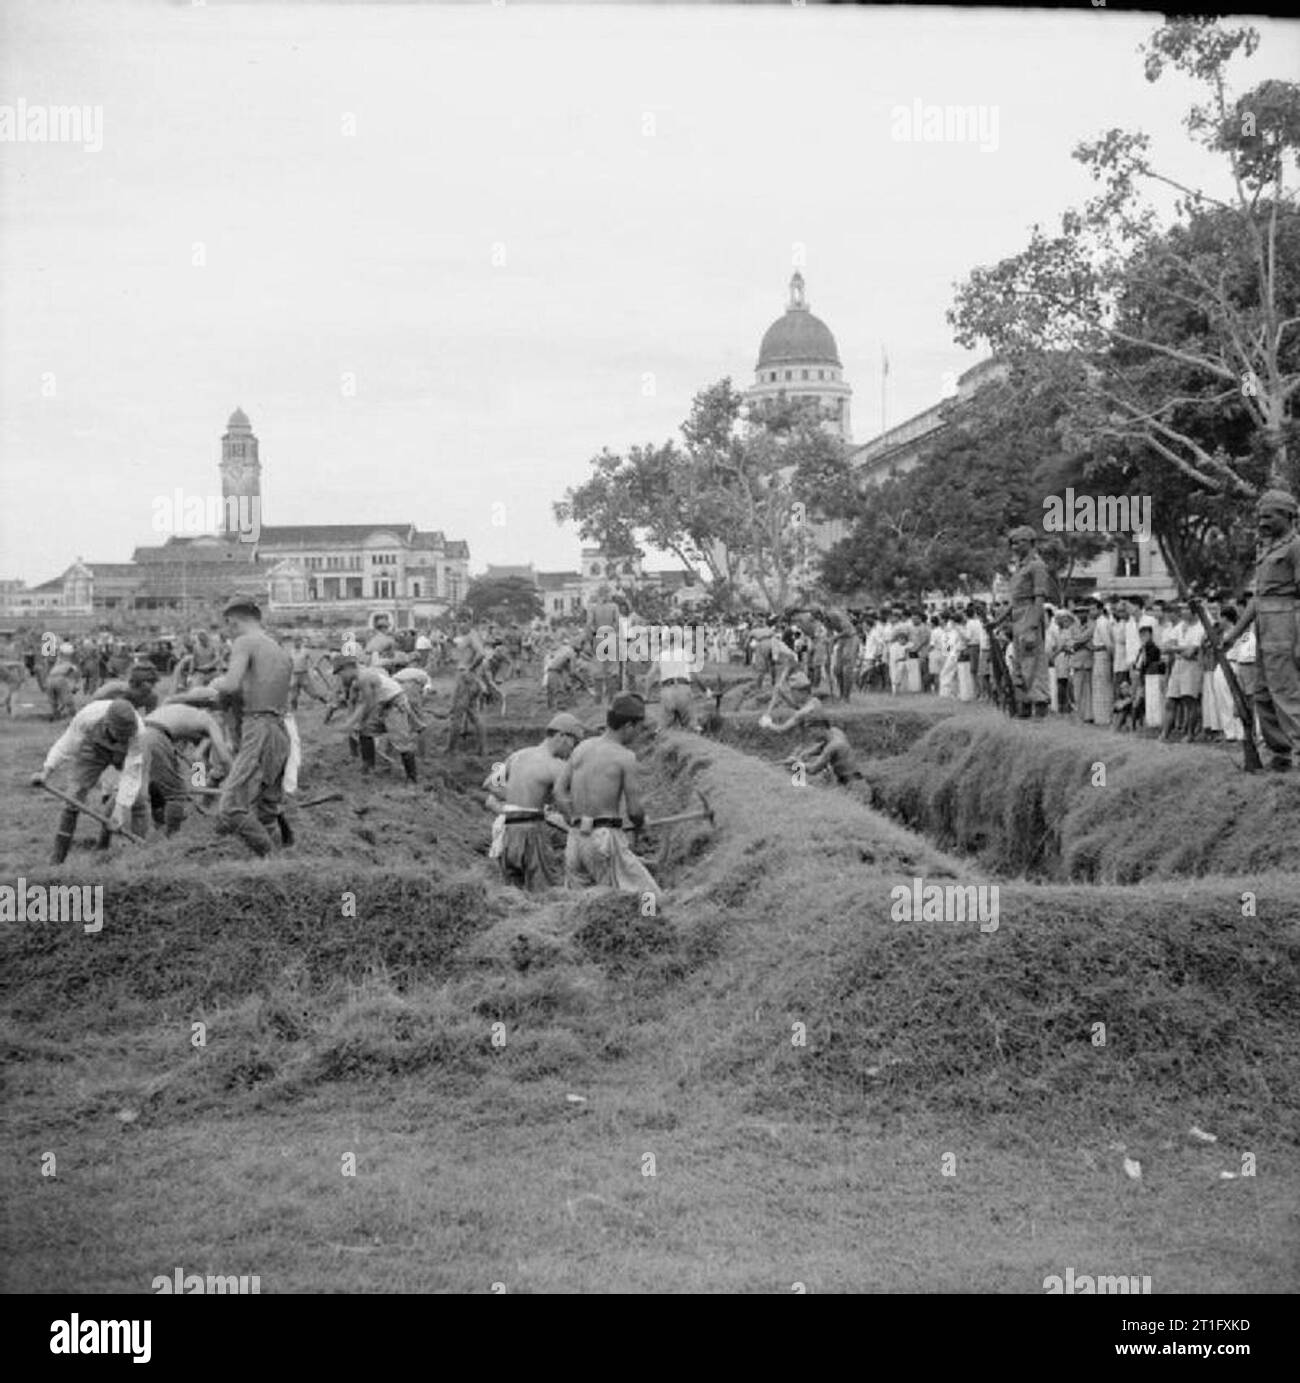 The British Reoccupation of Singapore Outside the Municipal Building in Singapore, Japanese prisoners of war fill in trenches that they had forced Allied prisoners to dig during the war. Stock Photo